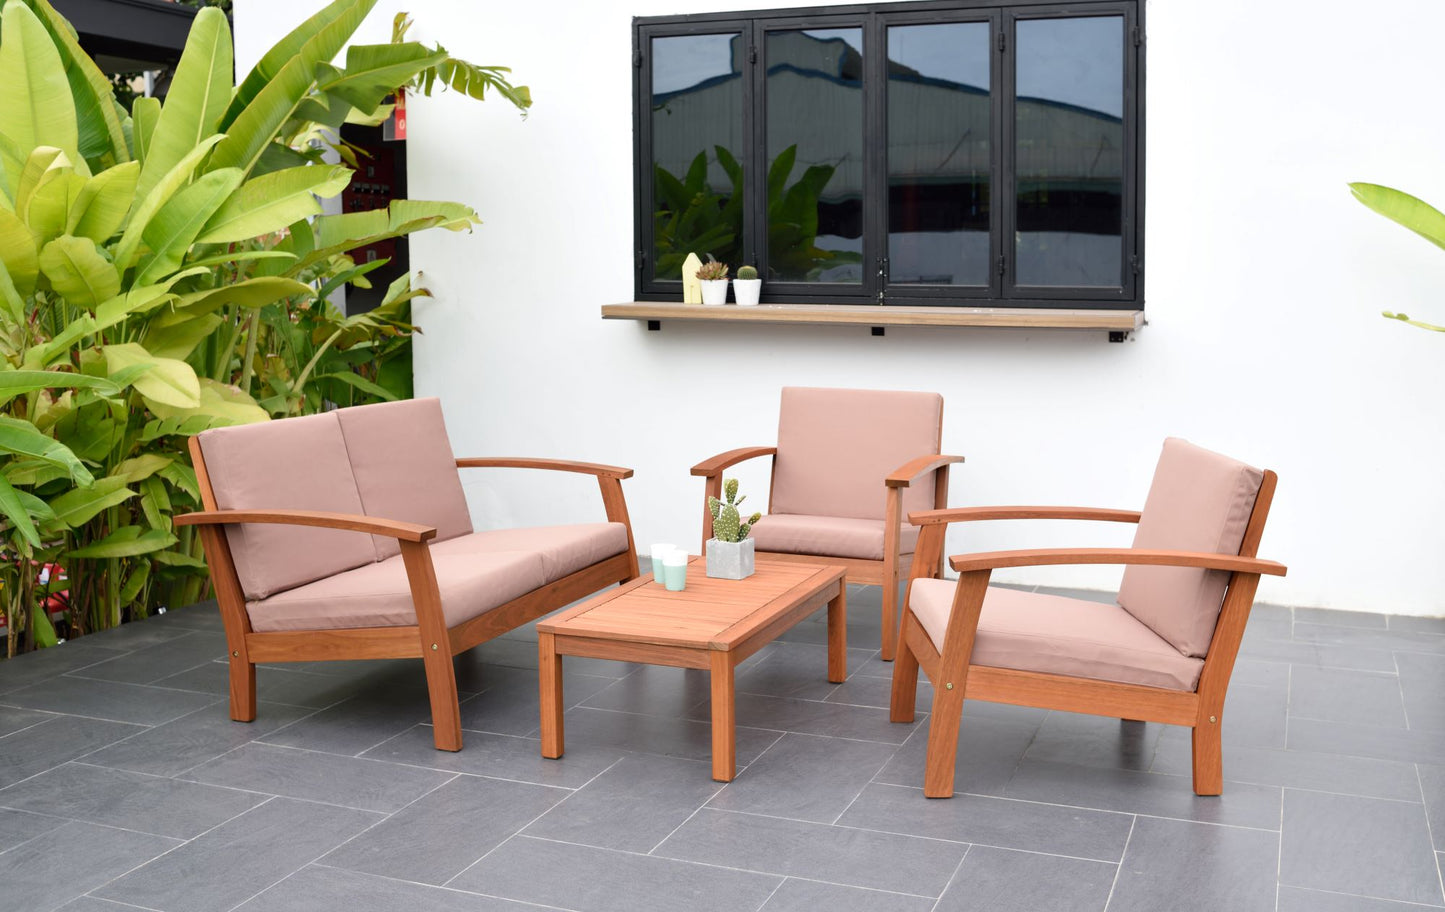 WAS $899. NOW $499 *BRAND NEW* 4 Piece 100% FSC Certified Solid Wood Seating Set | Ideal Furniture Set For Outdoor